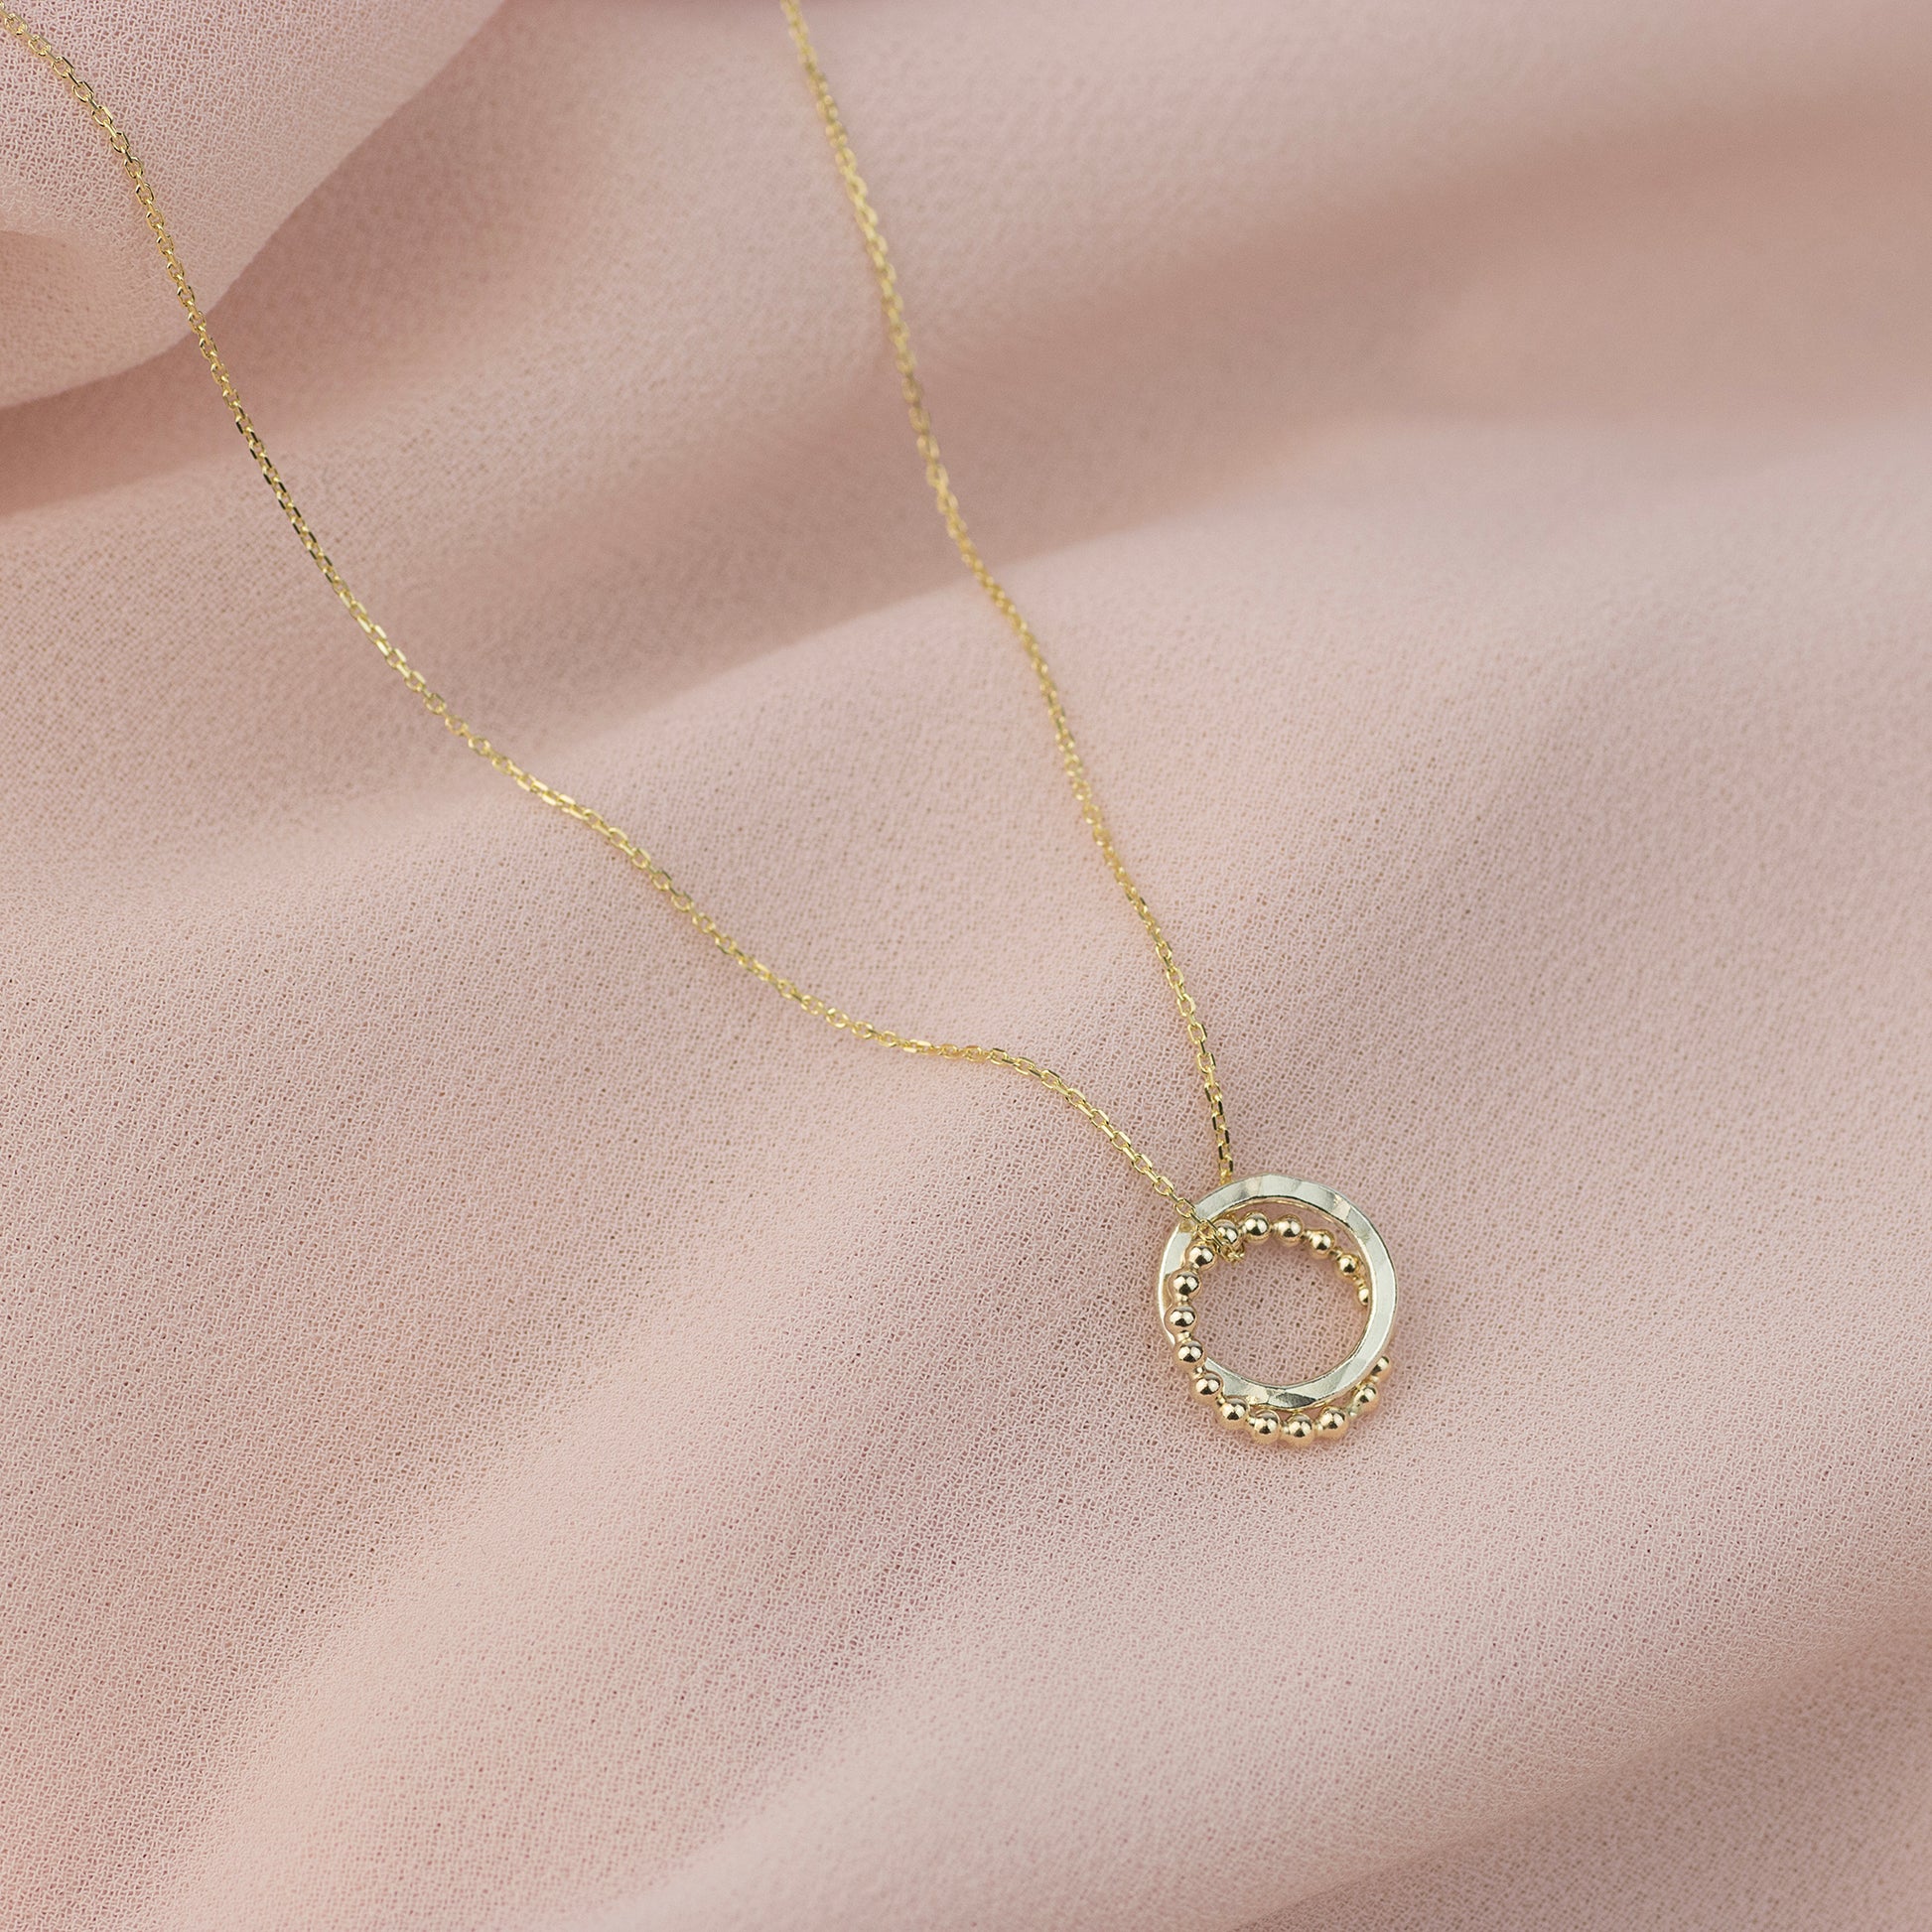 Gift for Niece from Aunt - 9kt Gold & Silver Love Knot Necklace